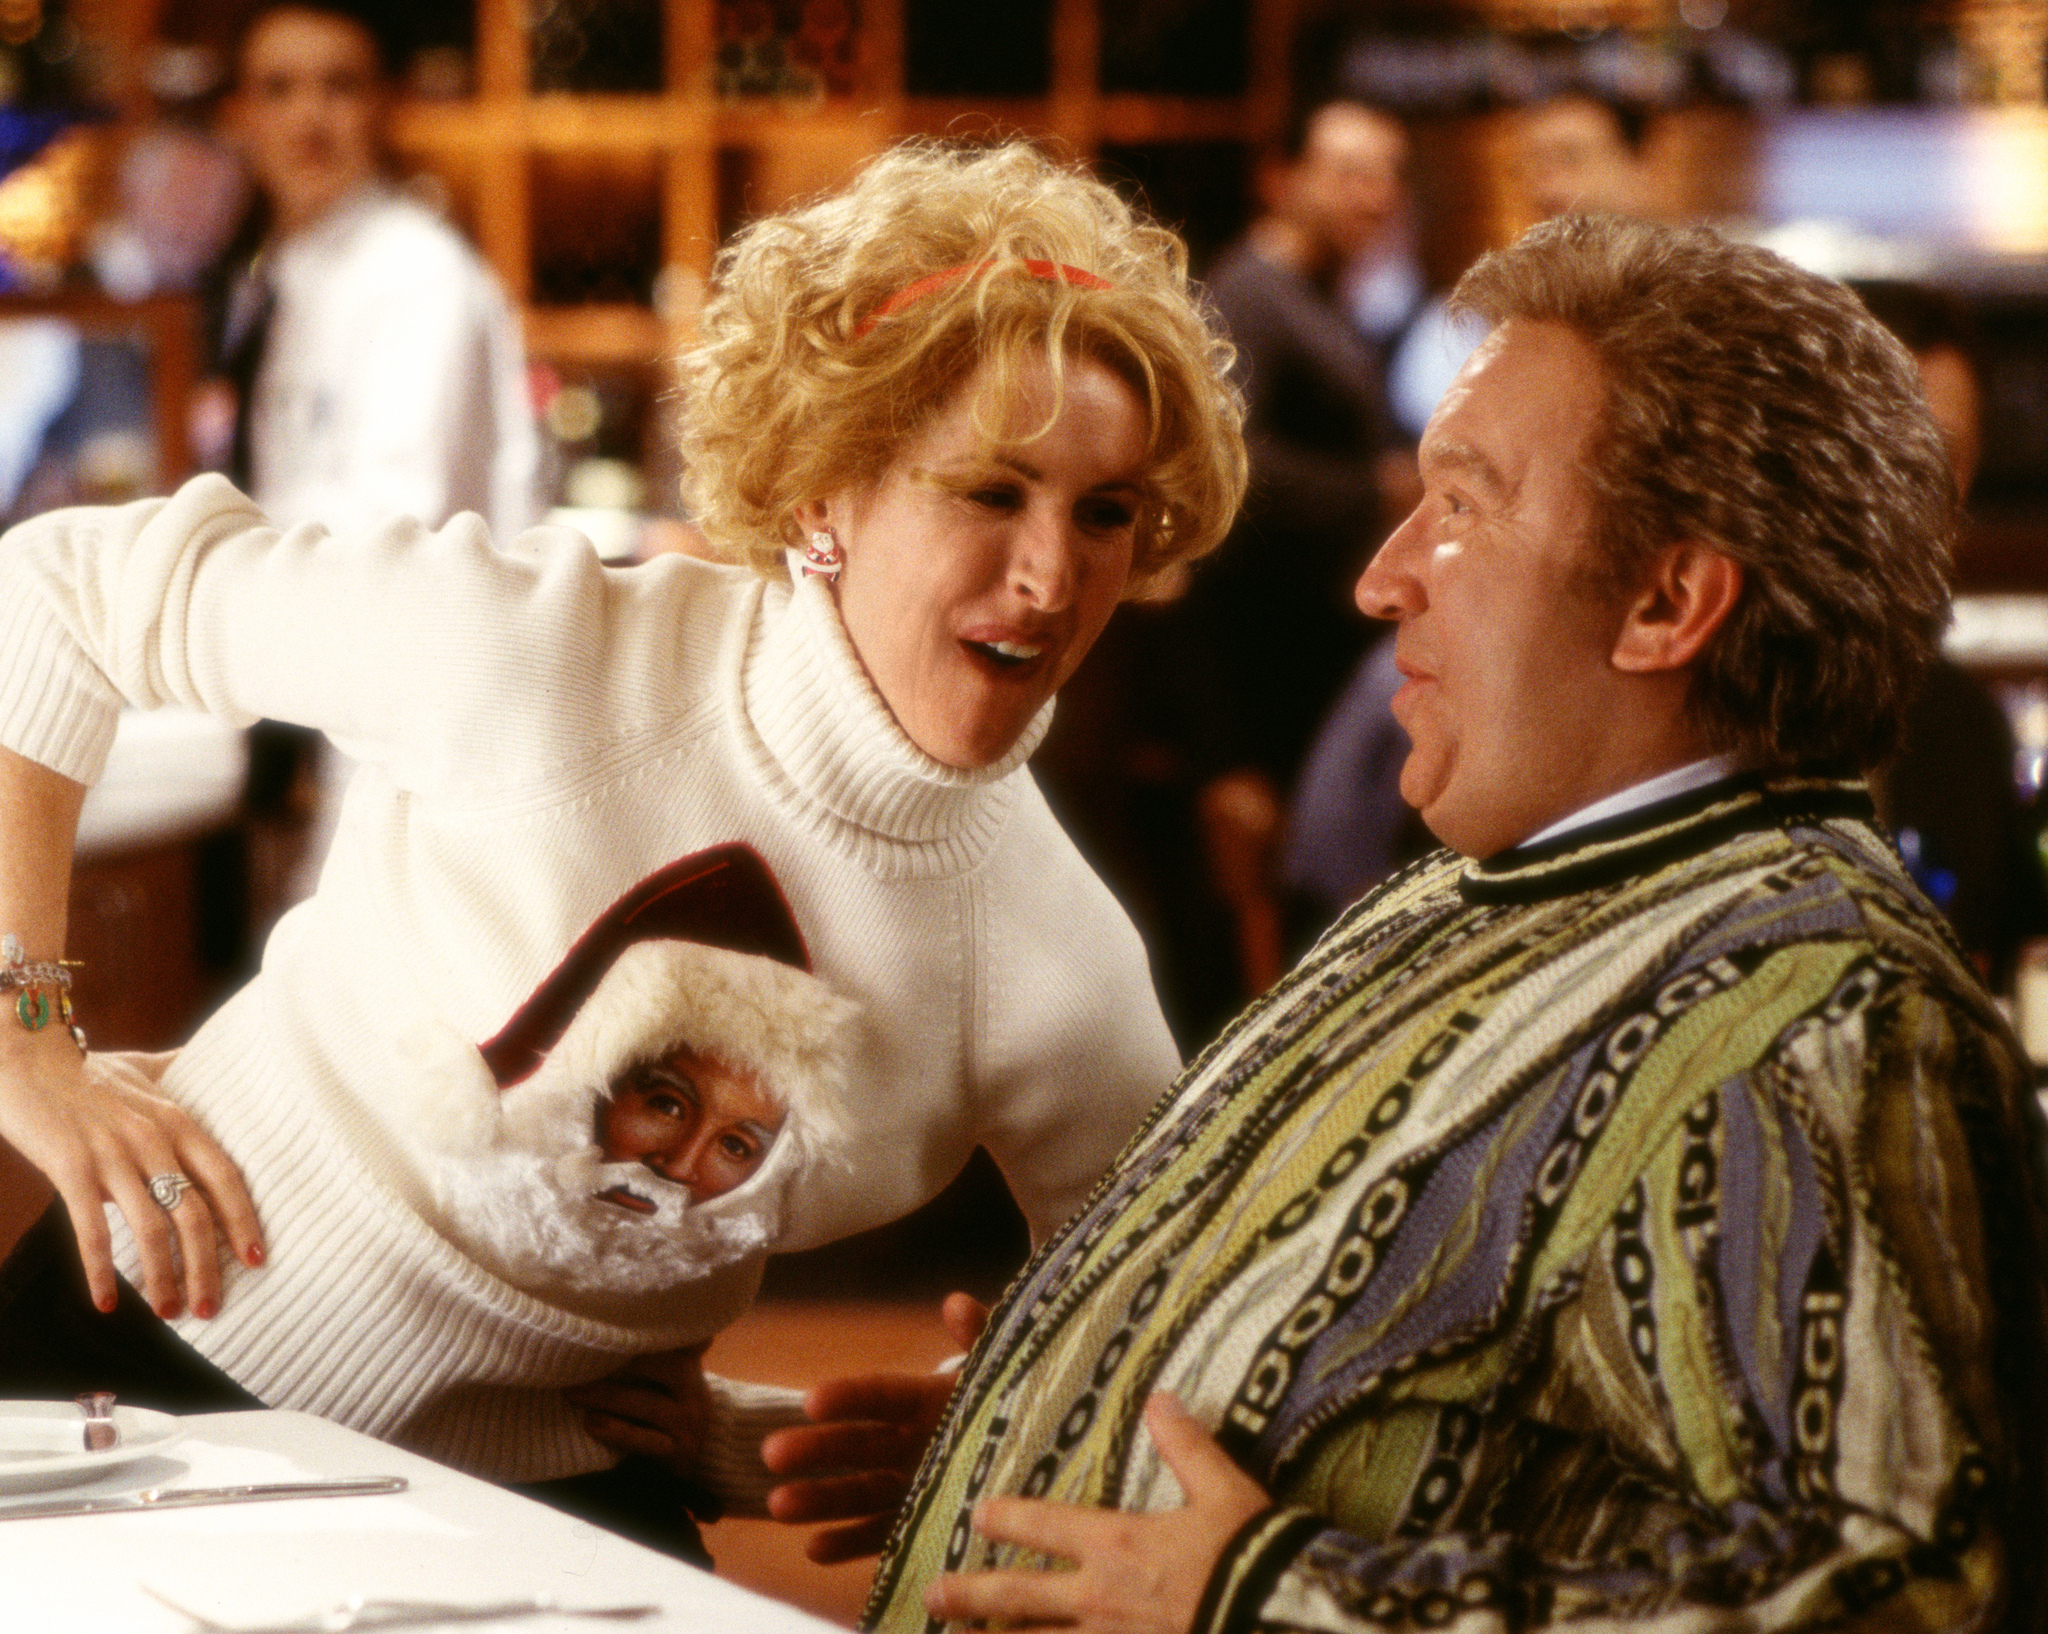 Still of Tim Allen and Molly Shannon in The Santa Clause 2 (2002)